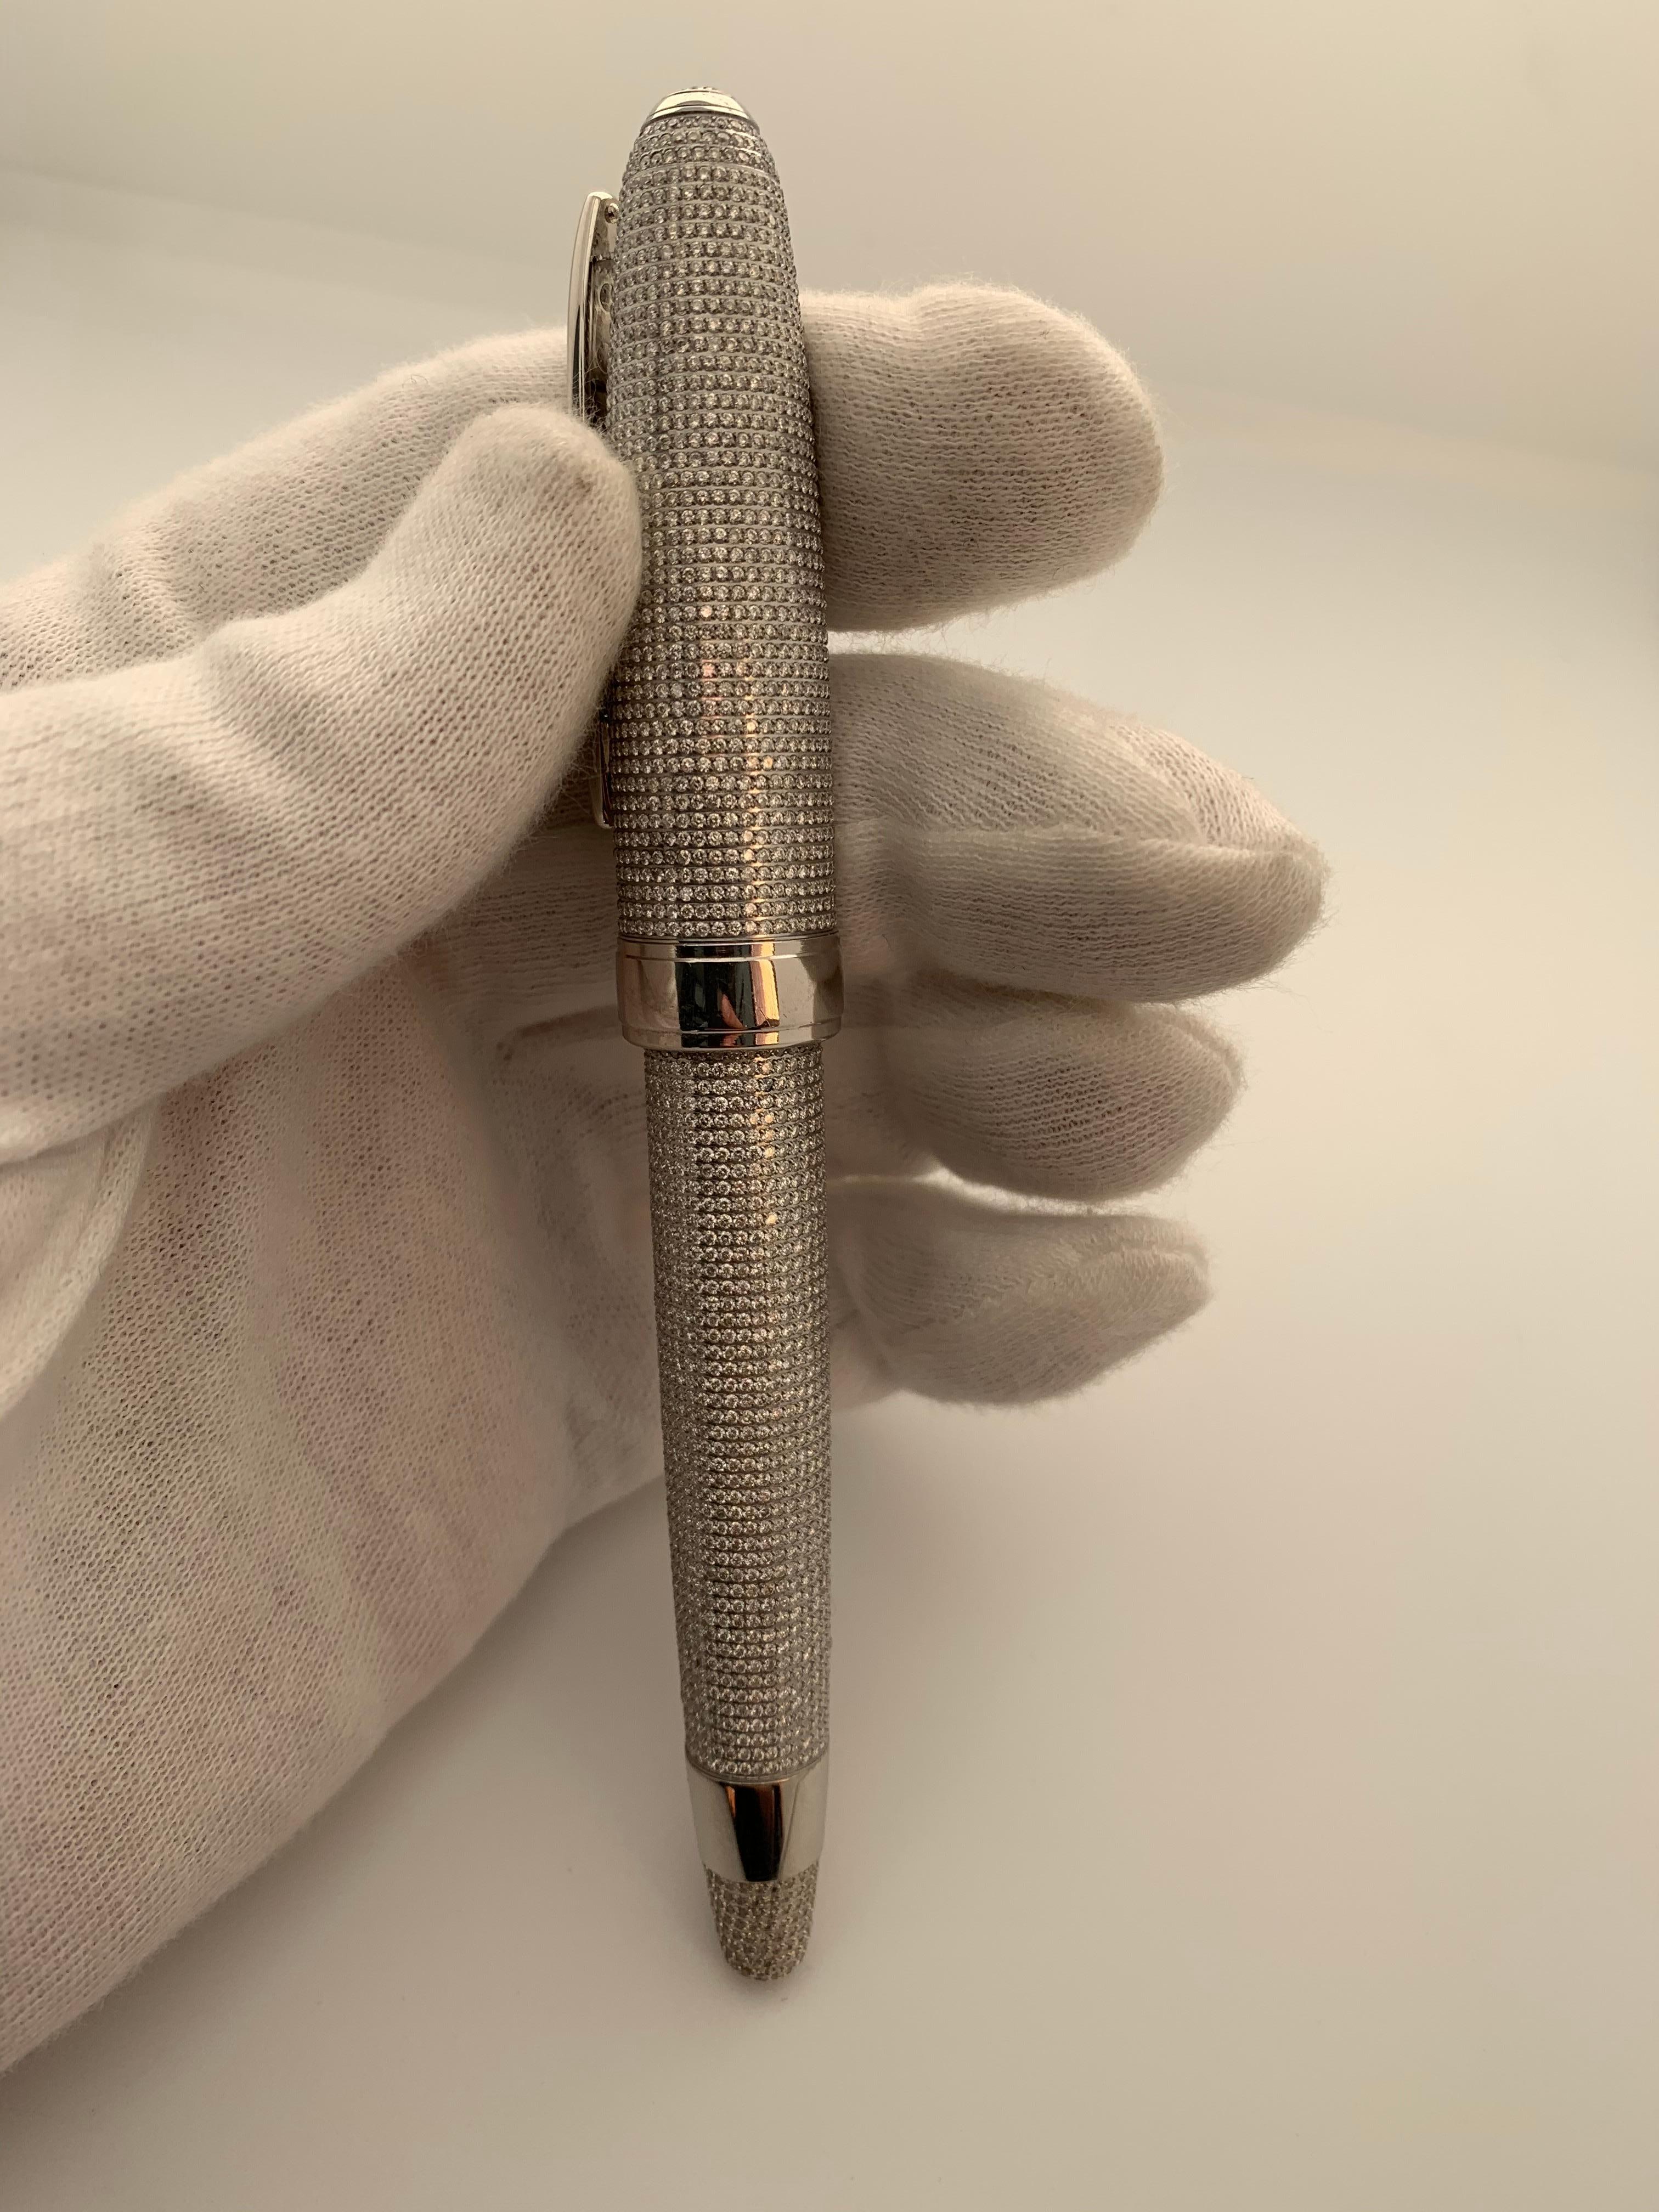 Fine Fountain Pen studded in Round Brilliant Diamonds using Stainless Steel.

Months are spent making just 1 of these pens. Inquire for others in our inventory.

Approximately 17.20 Carats.